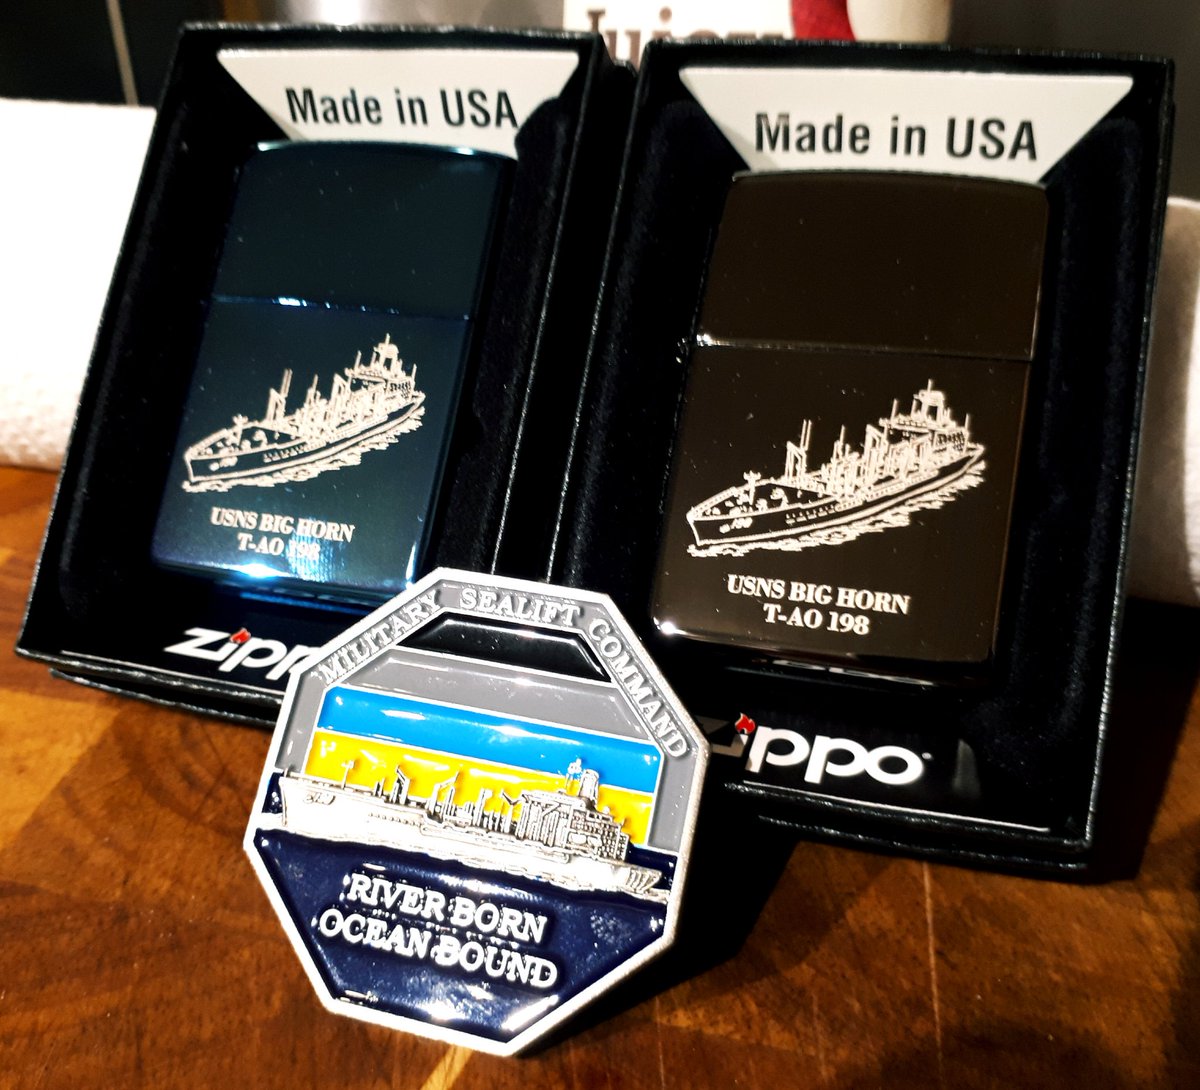 Many Thanks to #USNSBigHorn for my & @malteserfred new additions to our collection & Challenge Coin for the misses collection @MSCSealift